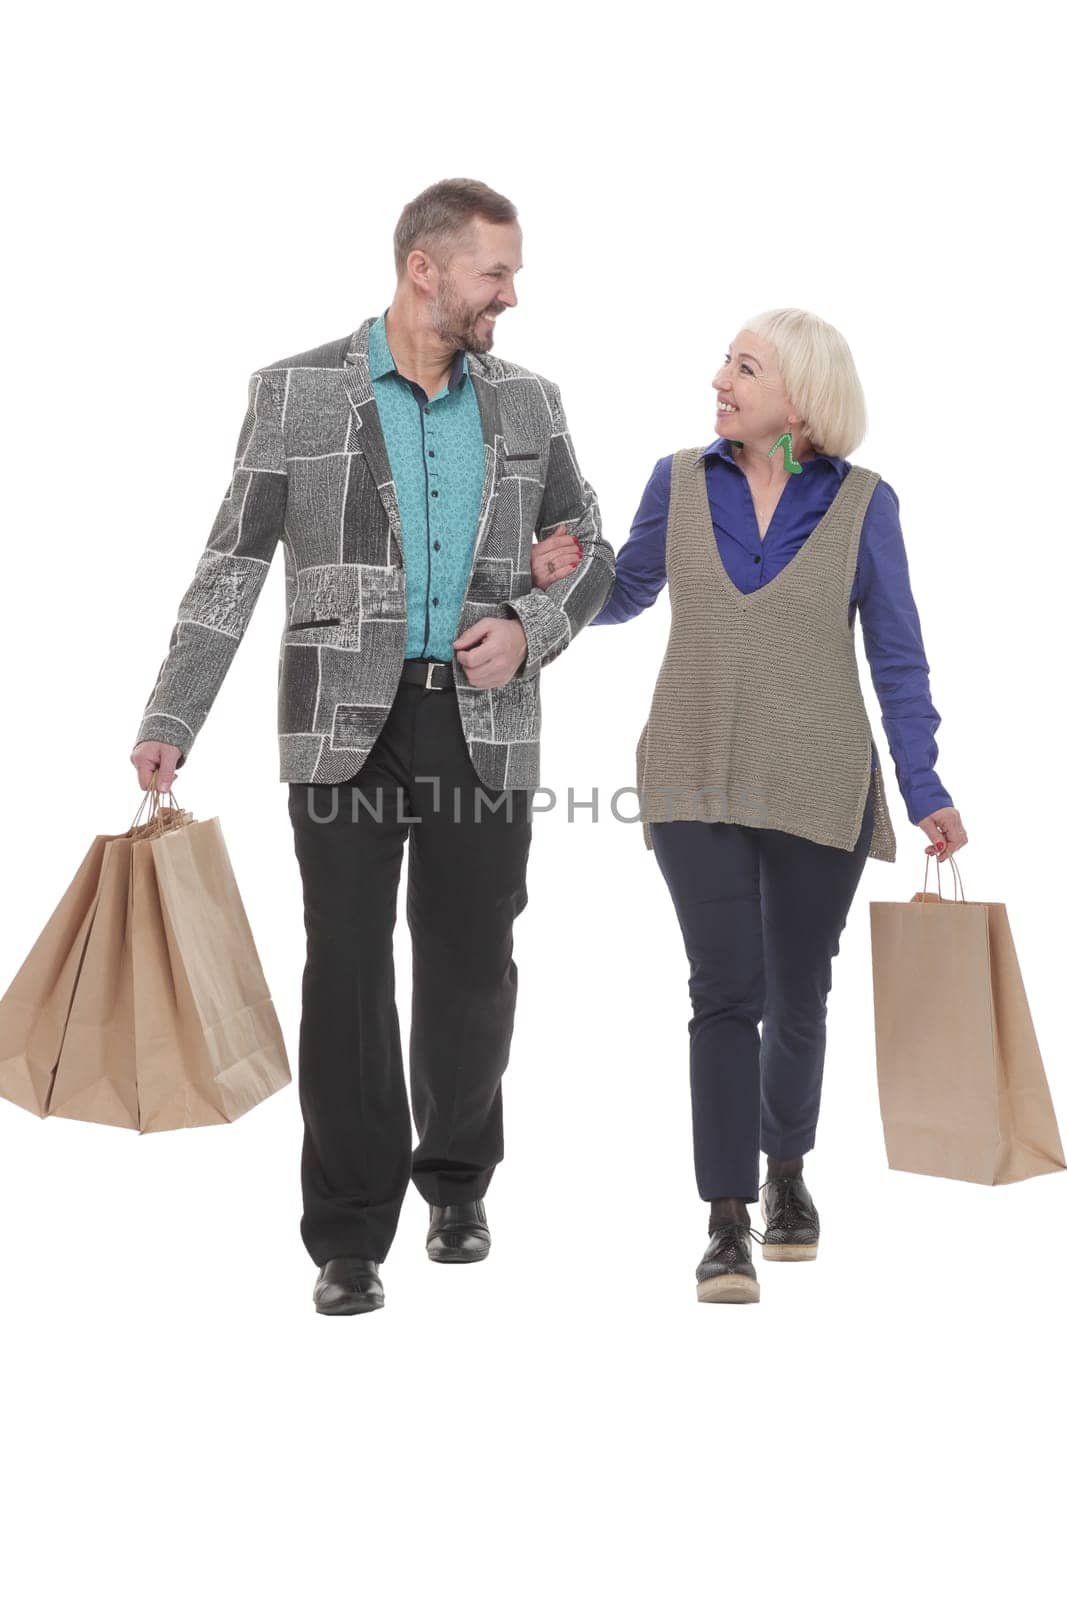 in full growth. happy married couple with shopping bags. isolated on a white background.